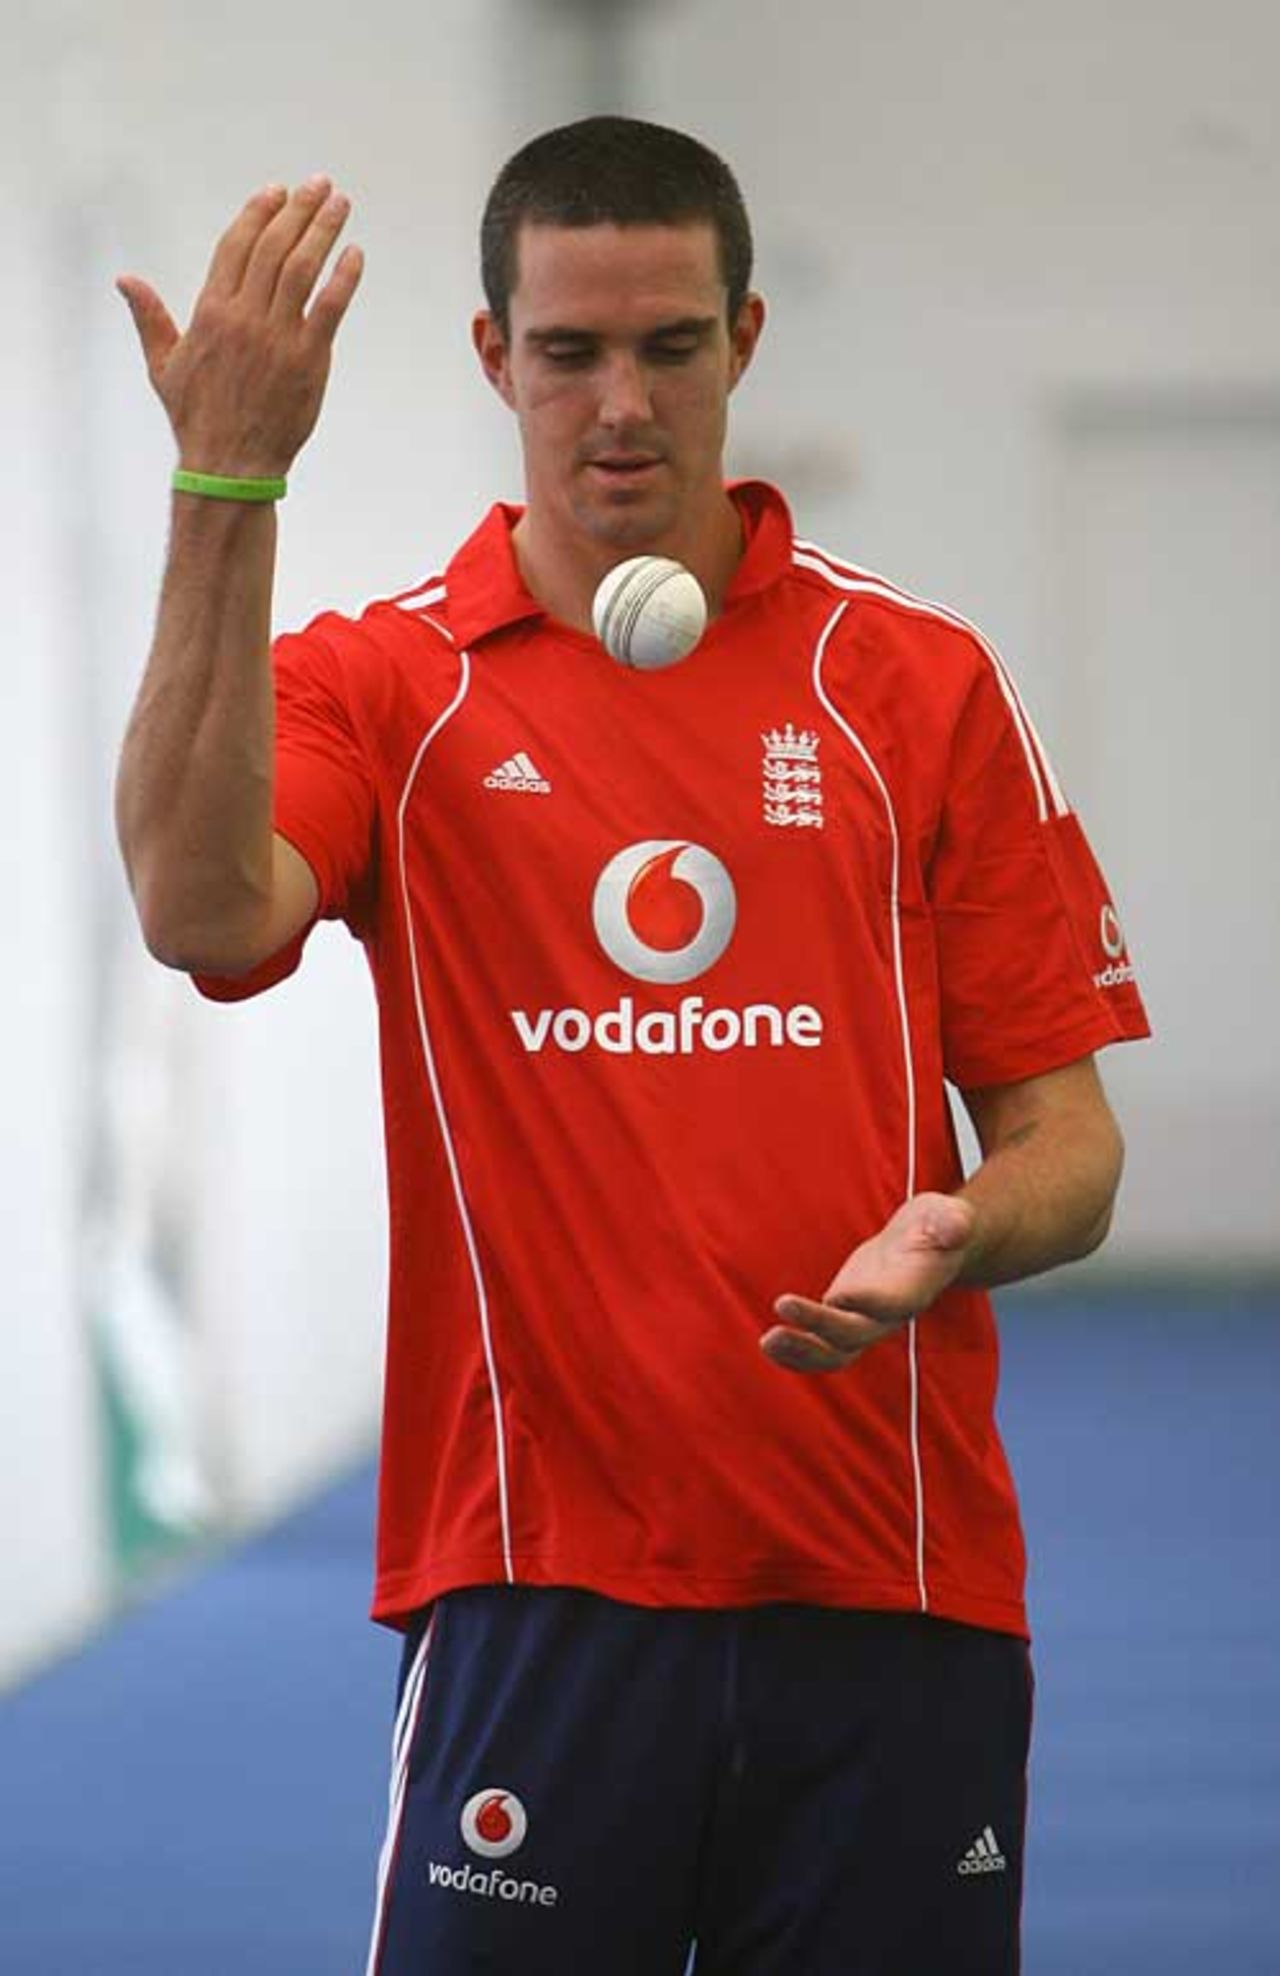 Kevin Pietersen will have to wait to lead England in a Twenty20, Chester-le-Street, August 19, 2008